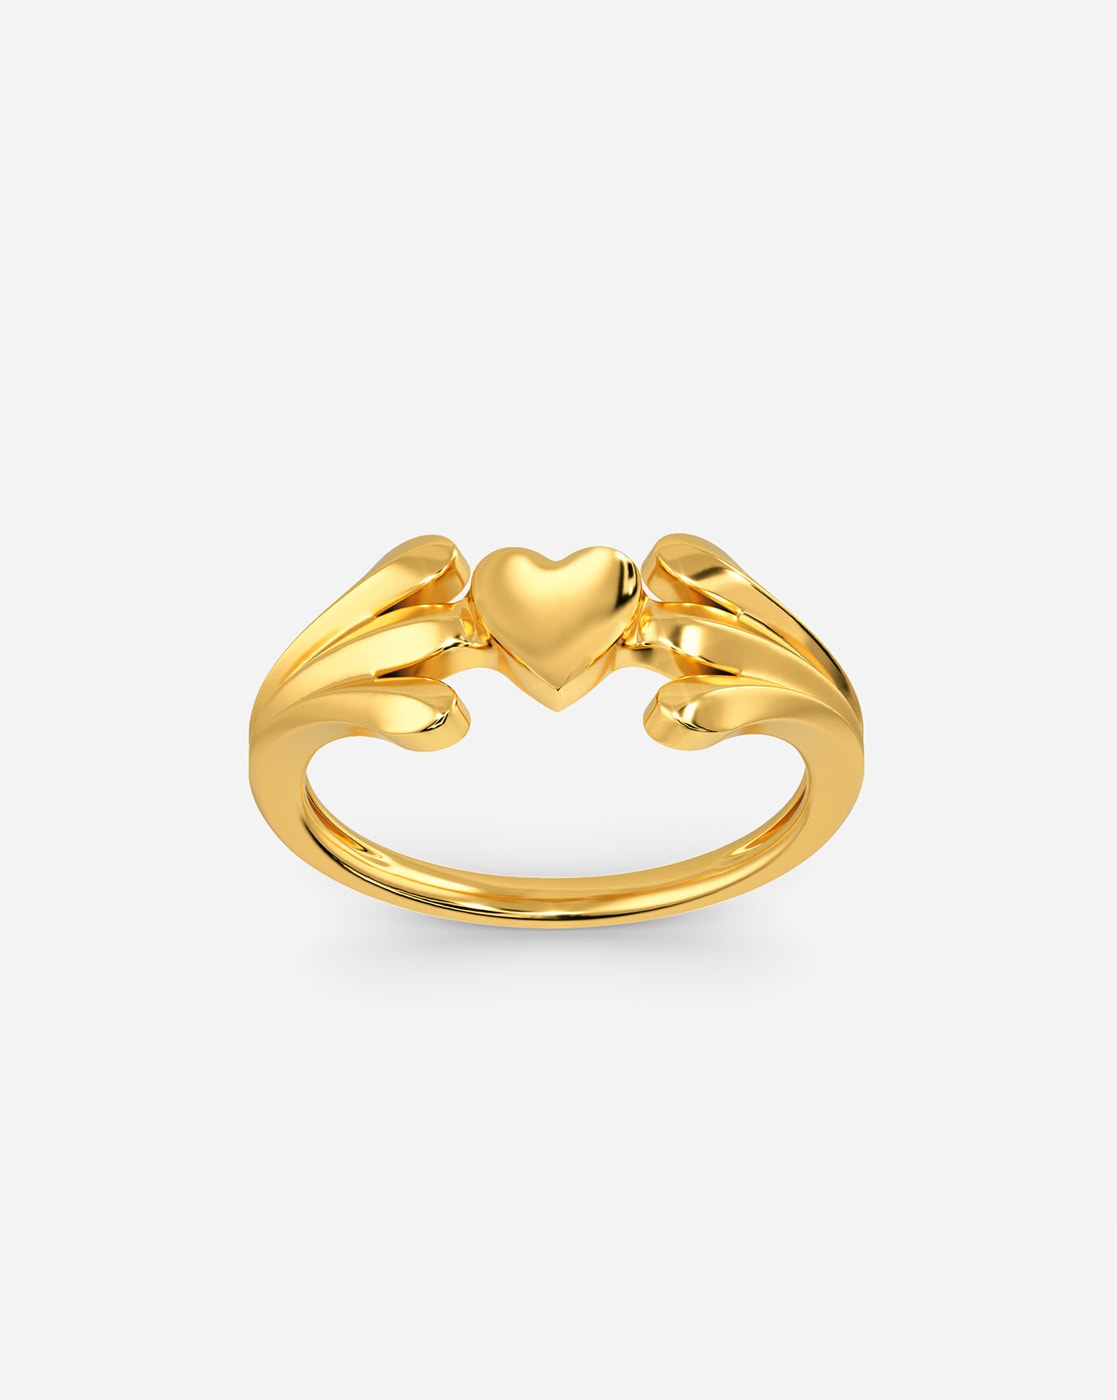 25 Most Beautiful and Simple Gold Ring Designs for Women | Gold rings  fashion, Ladies gold rings, Gold ring designs